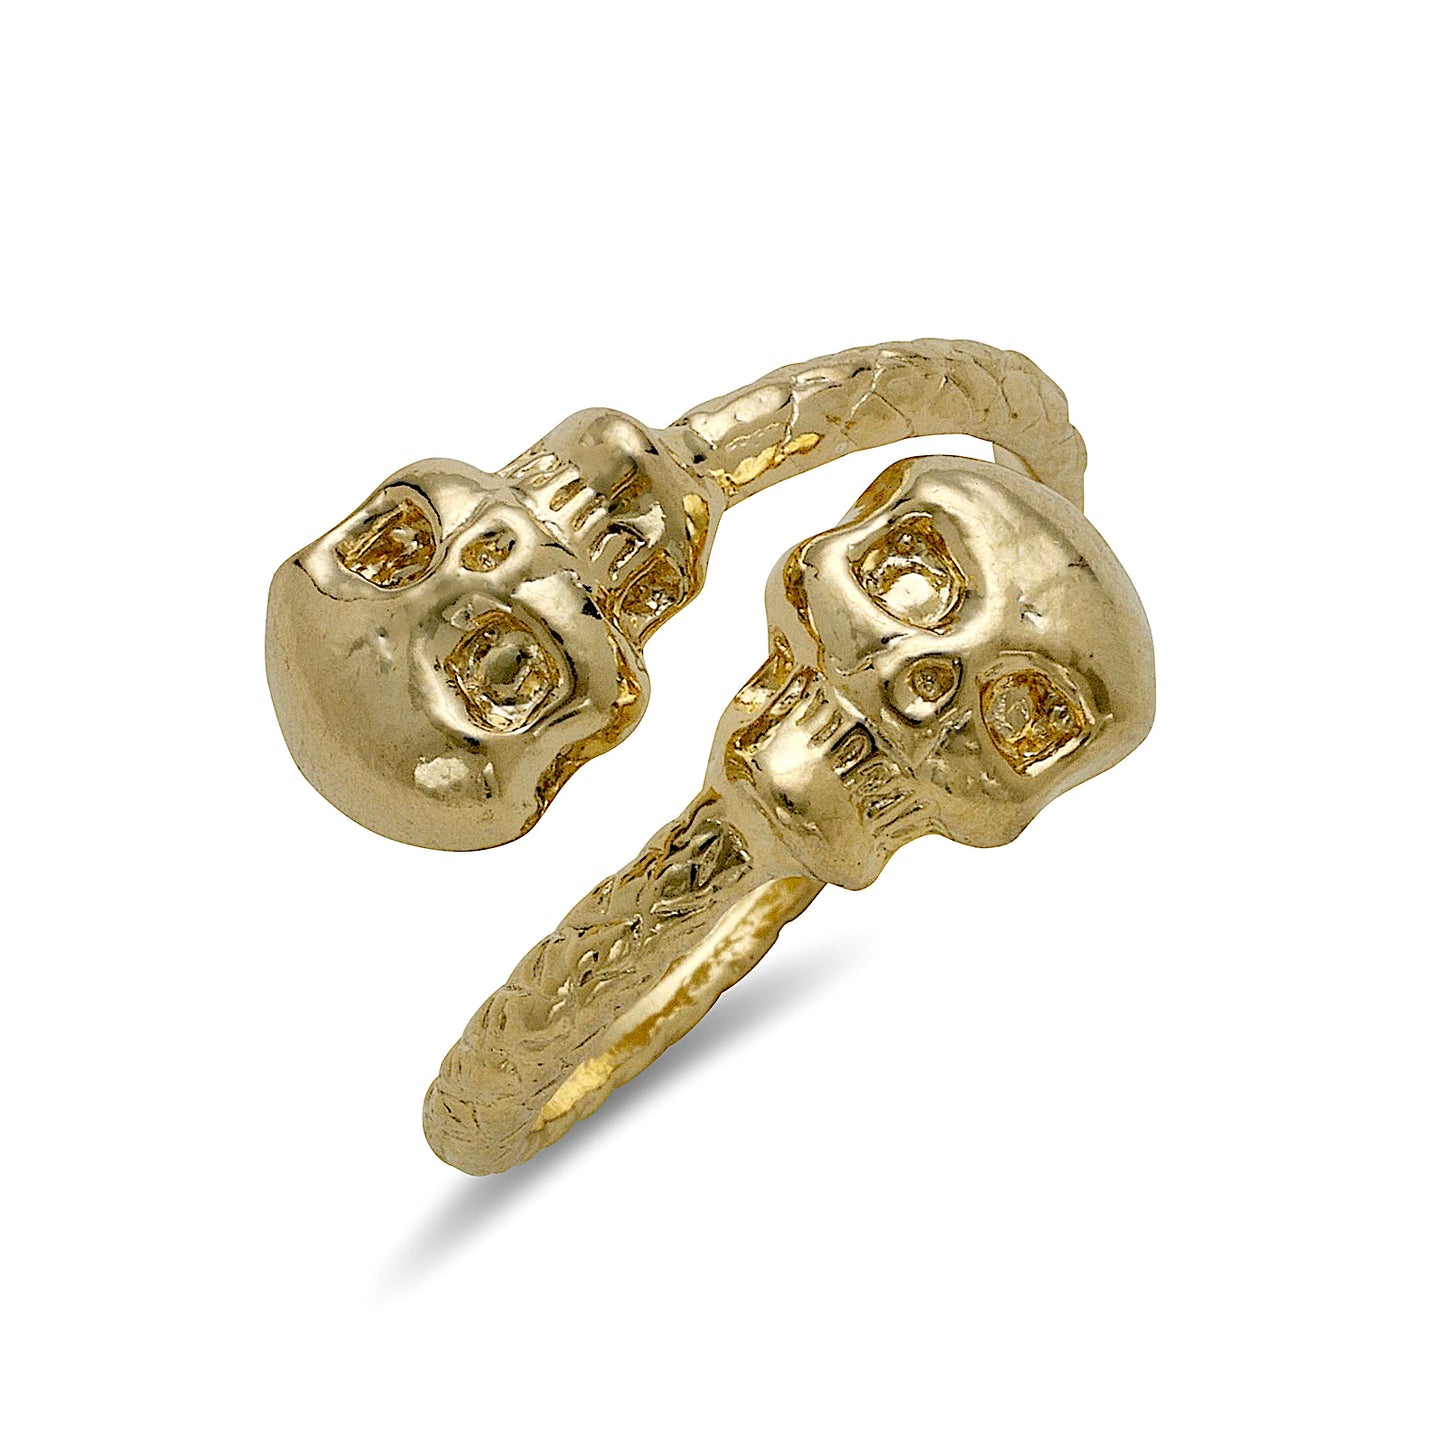 Skull ends 10K Gold West Indian Ring - Betterjewelry